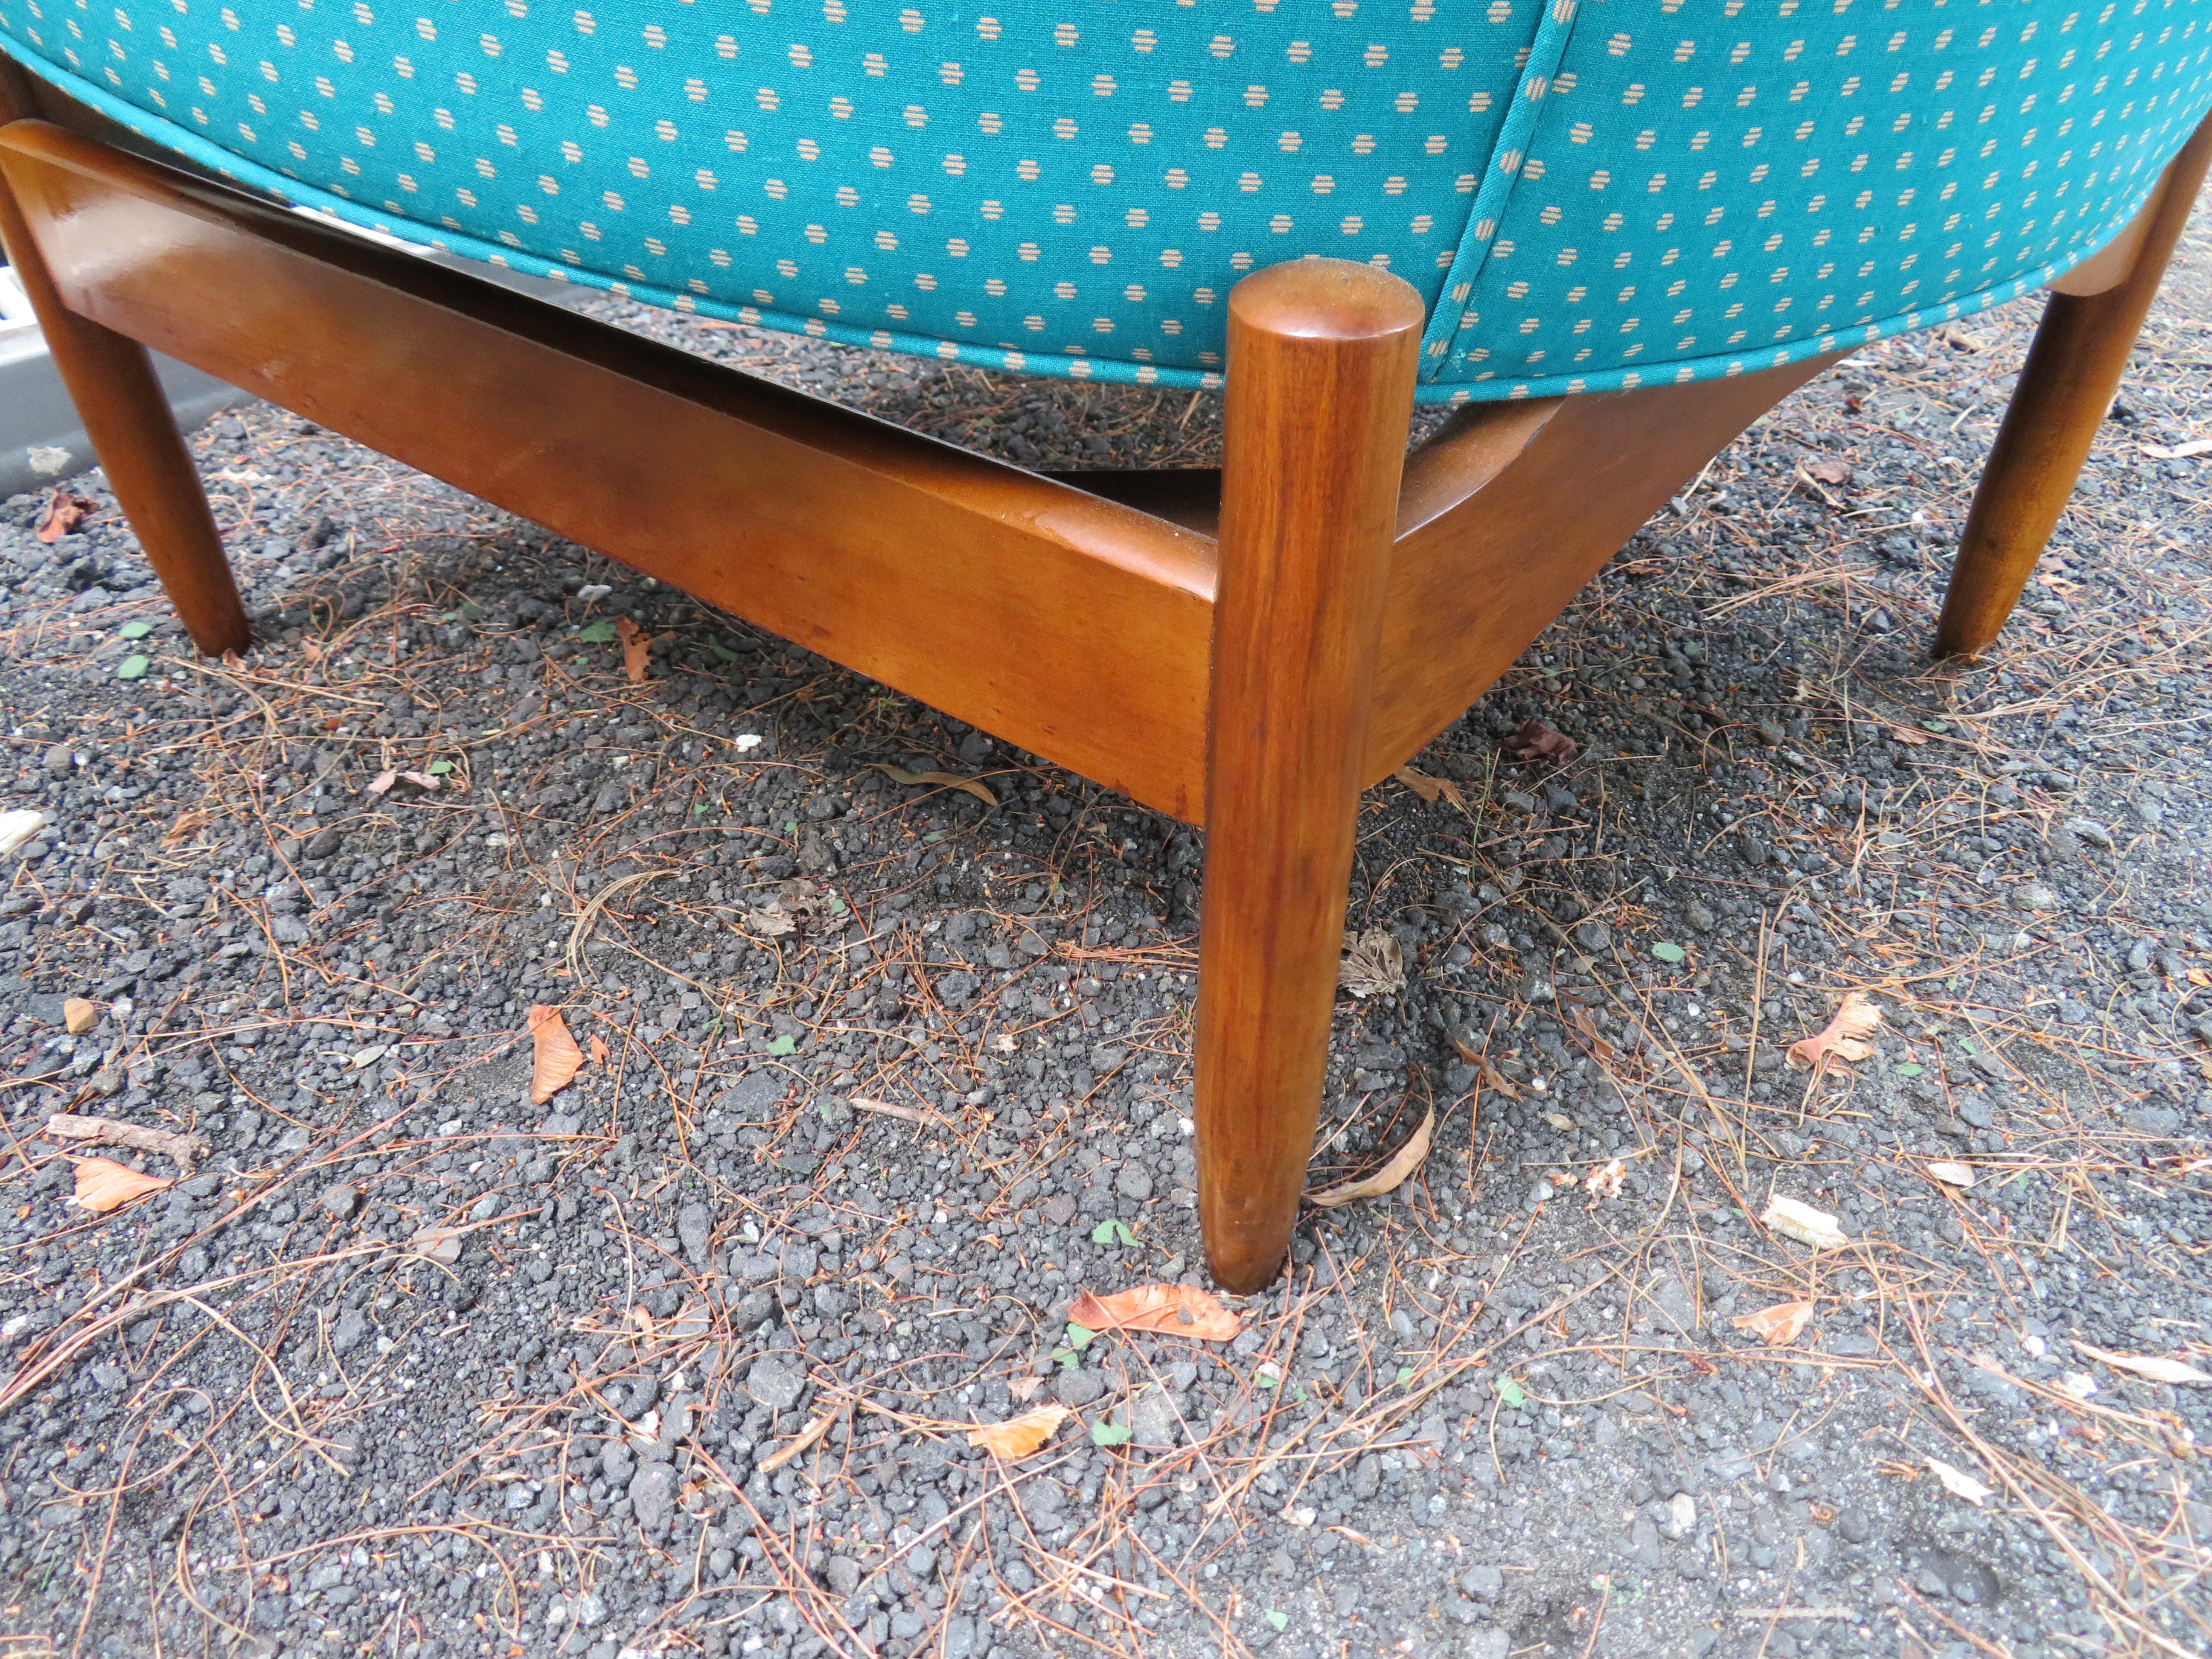 Lovely Lawrence Peabody Sculptural Walnut Lounge Chair, Mid-Century Modern 1